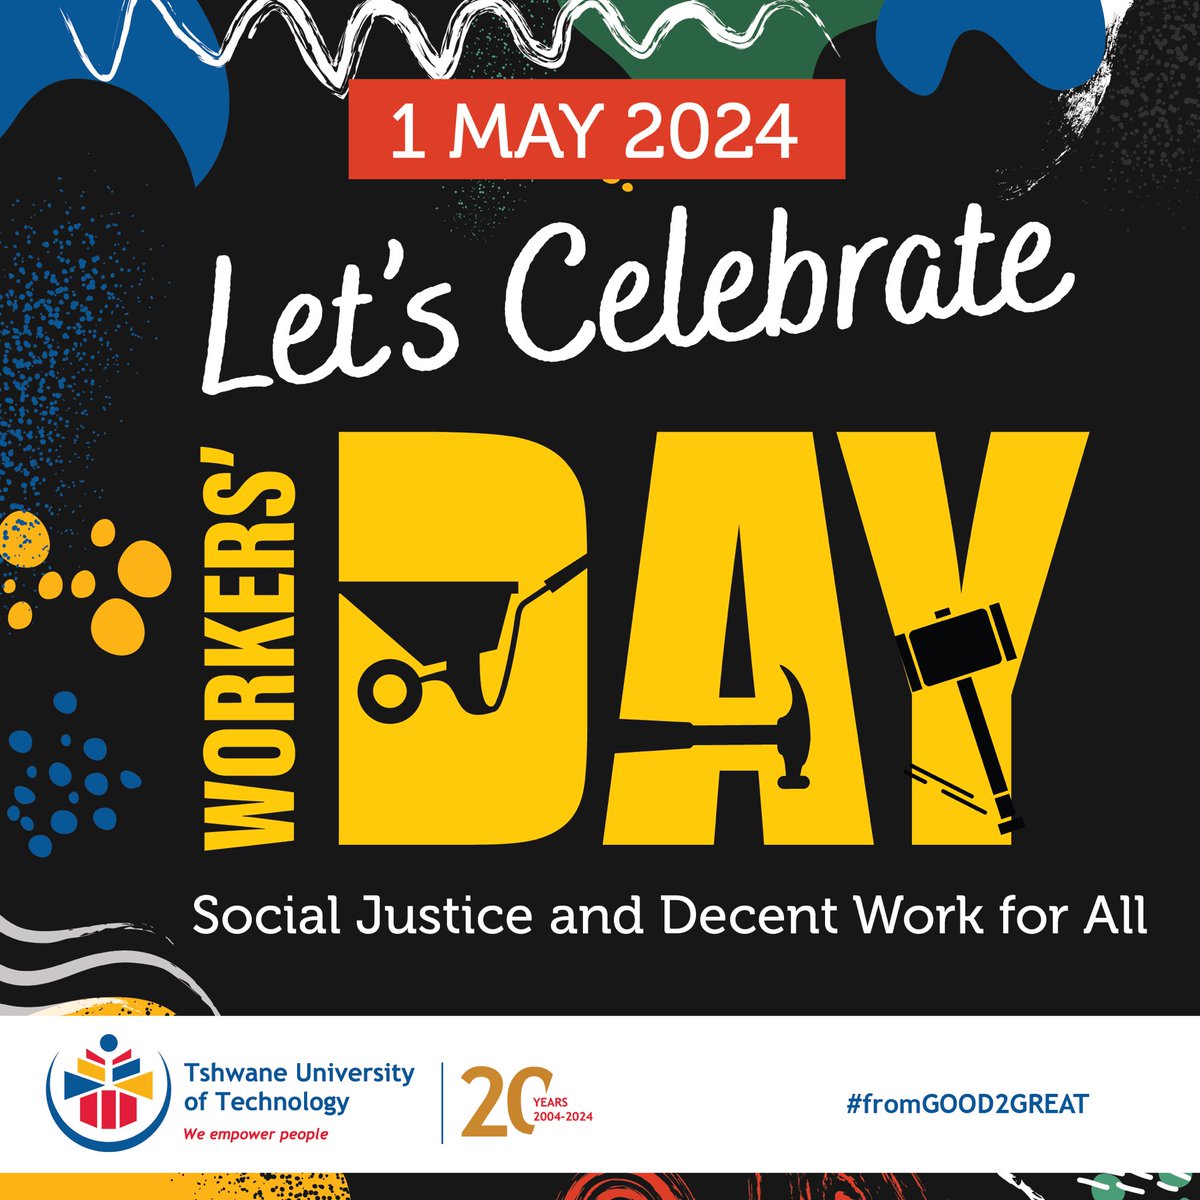 Hey TUT Fam! Happy Workers' Day Together, we can build a world where every worker is valued, respected, and treated with dignity. #workersday #FromGoodToGreat